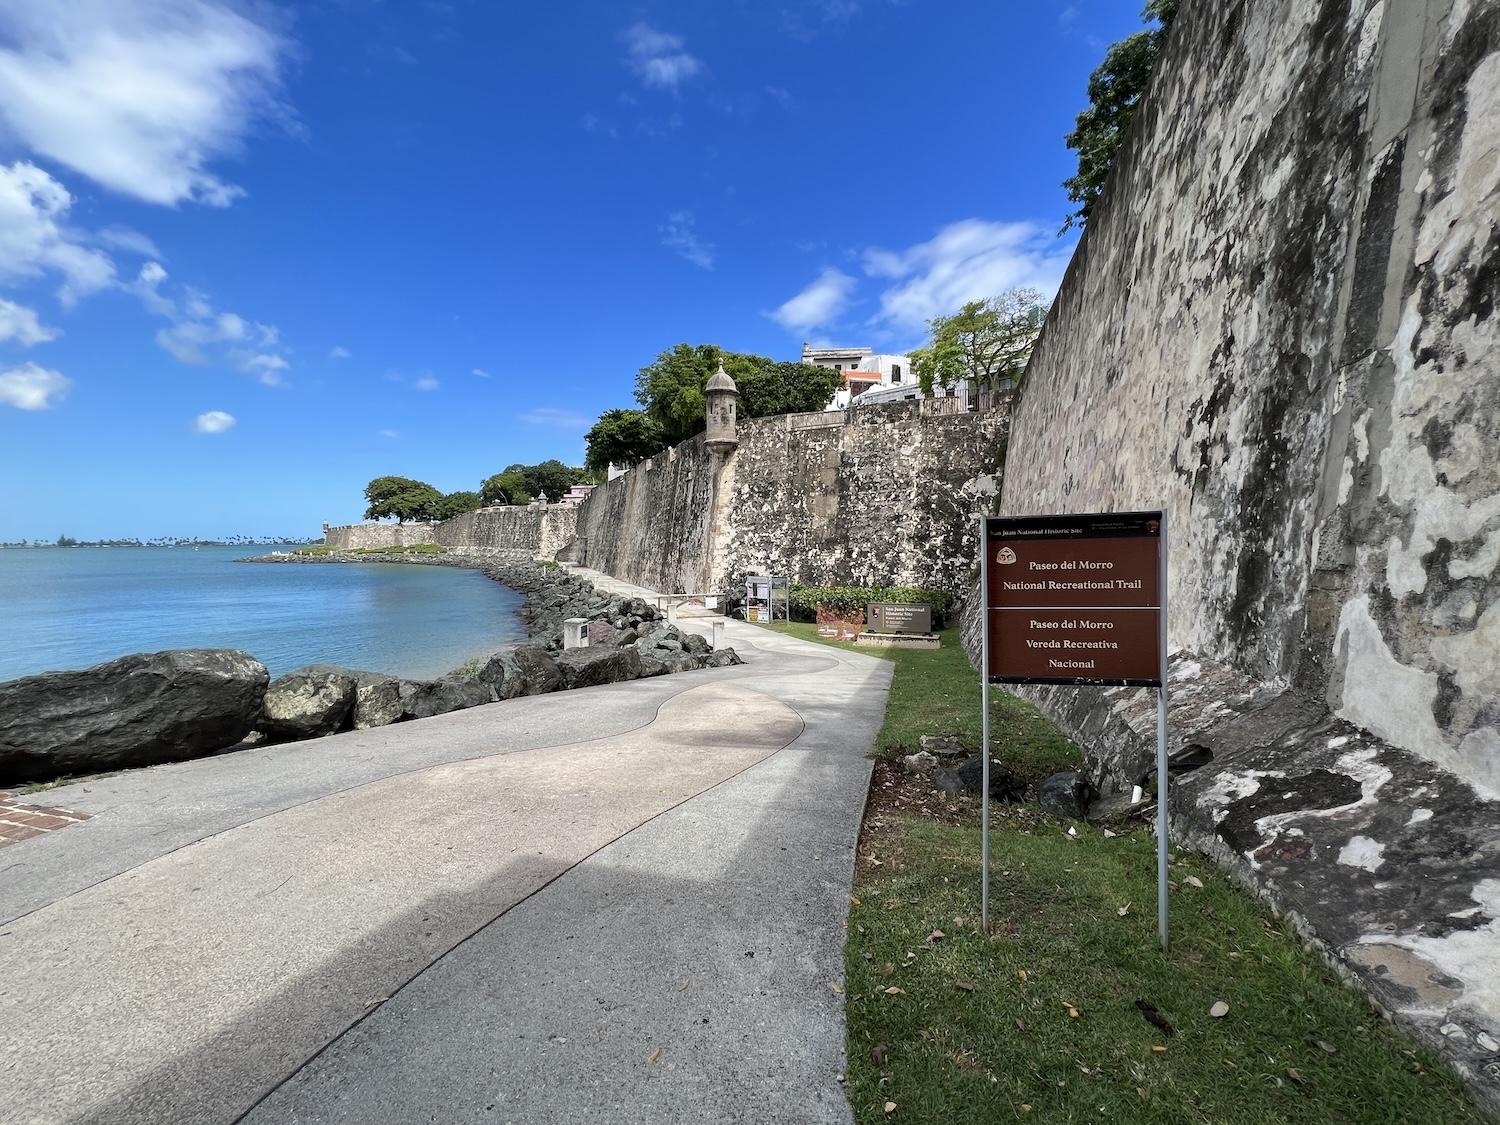 The popular Paseo del Morro paved pathway has been closed for months due to water leaking through the historic walls.